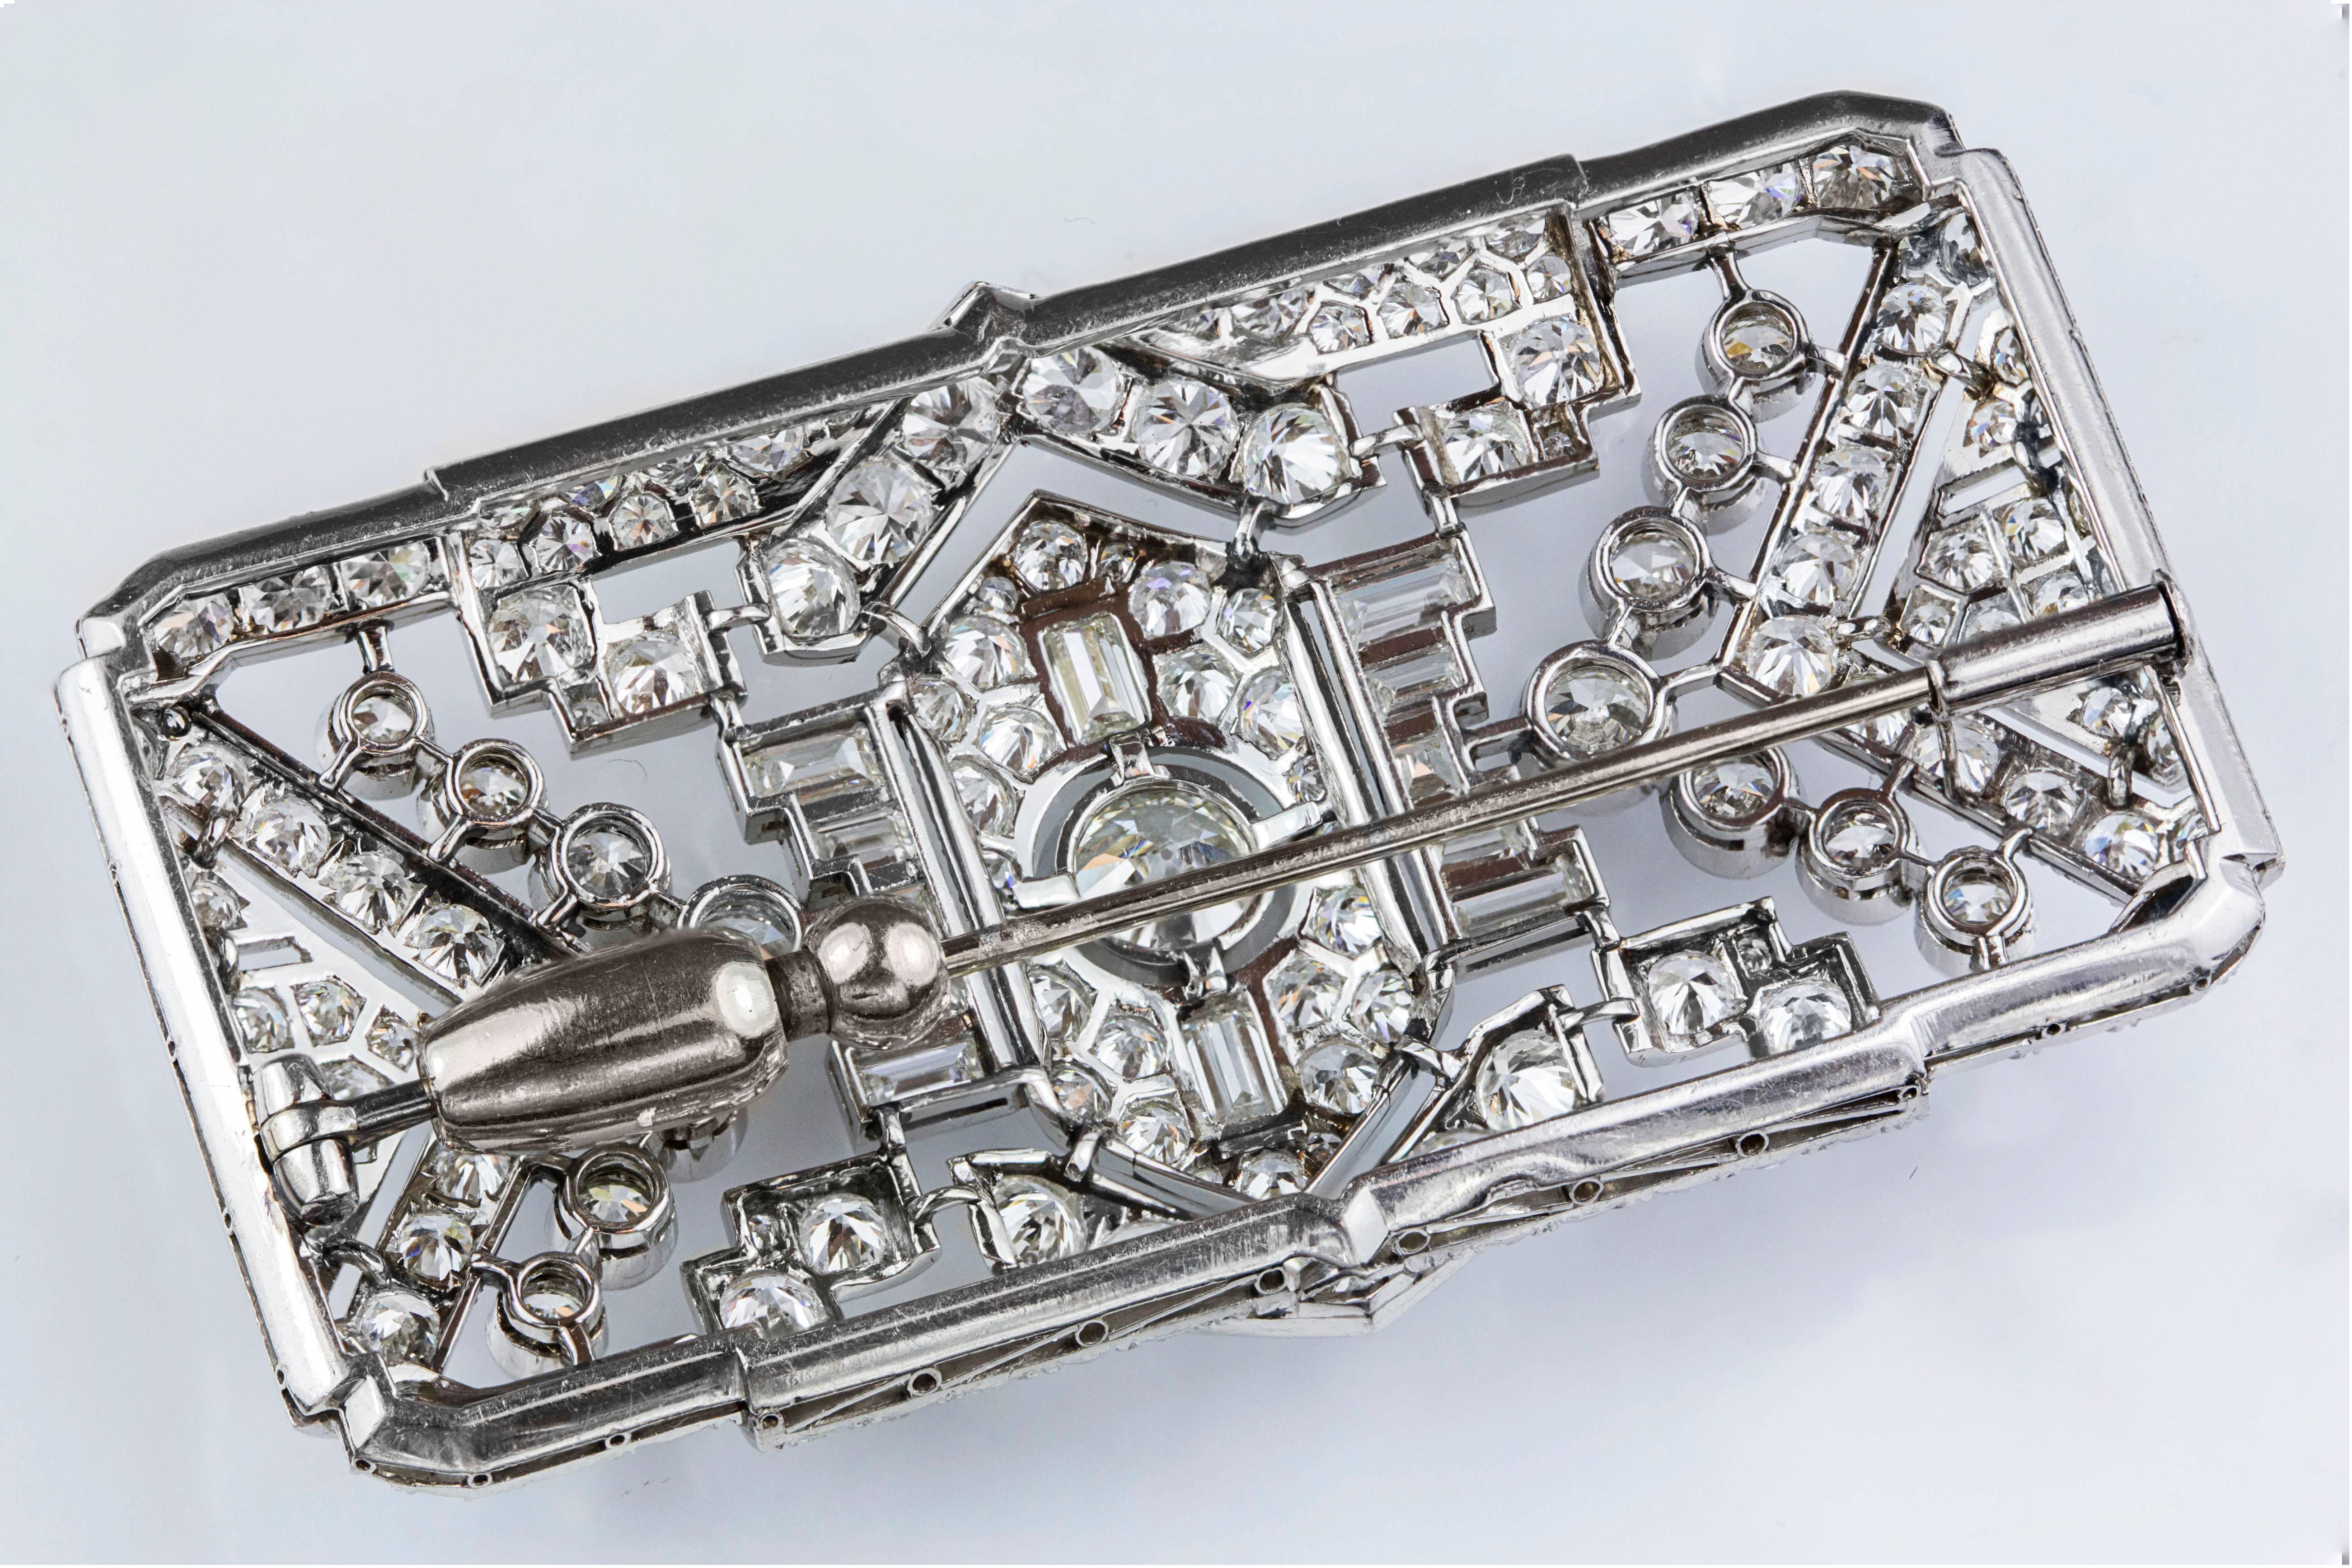 This antique art deco style brooch / pin has a beautiful intricate design set with 14.80 carats of mixed brilliant diamonds. Made in platinum. A gorgeous piece. 2.4 inches in length and 1.4 inches in width.

